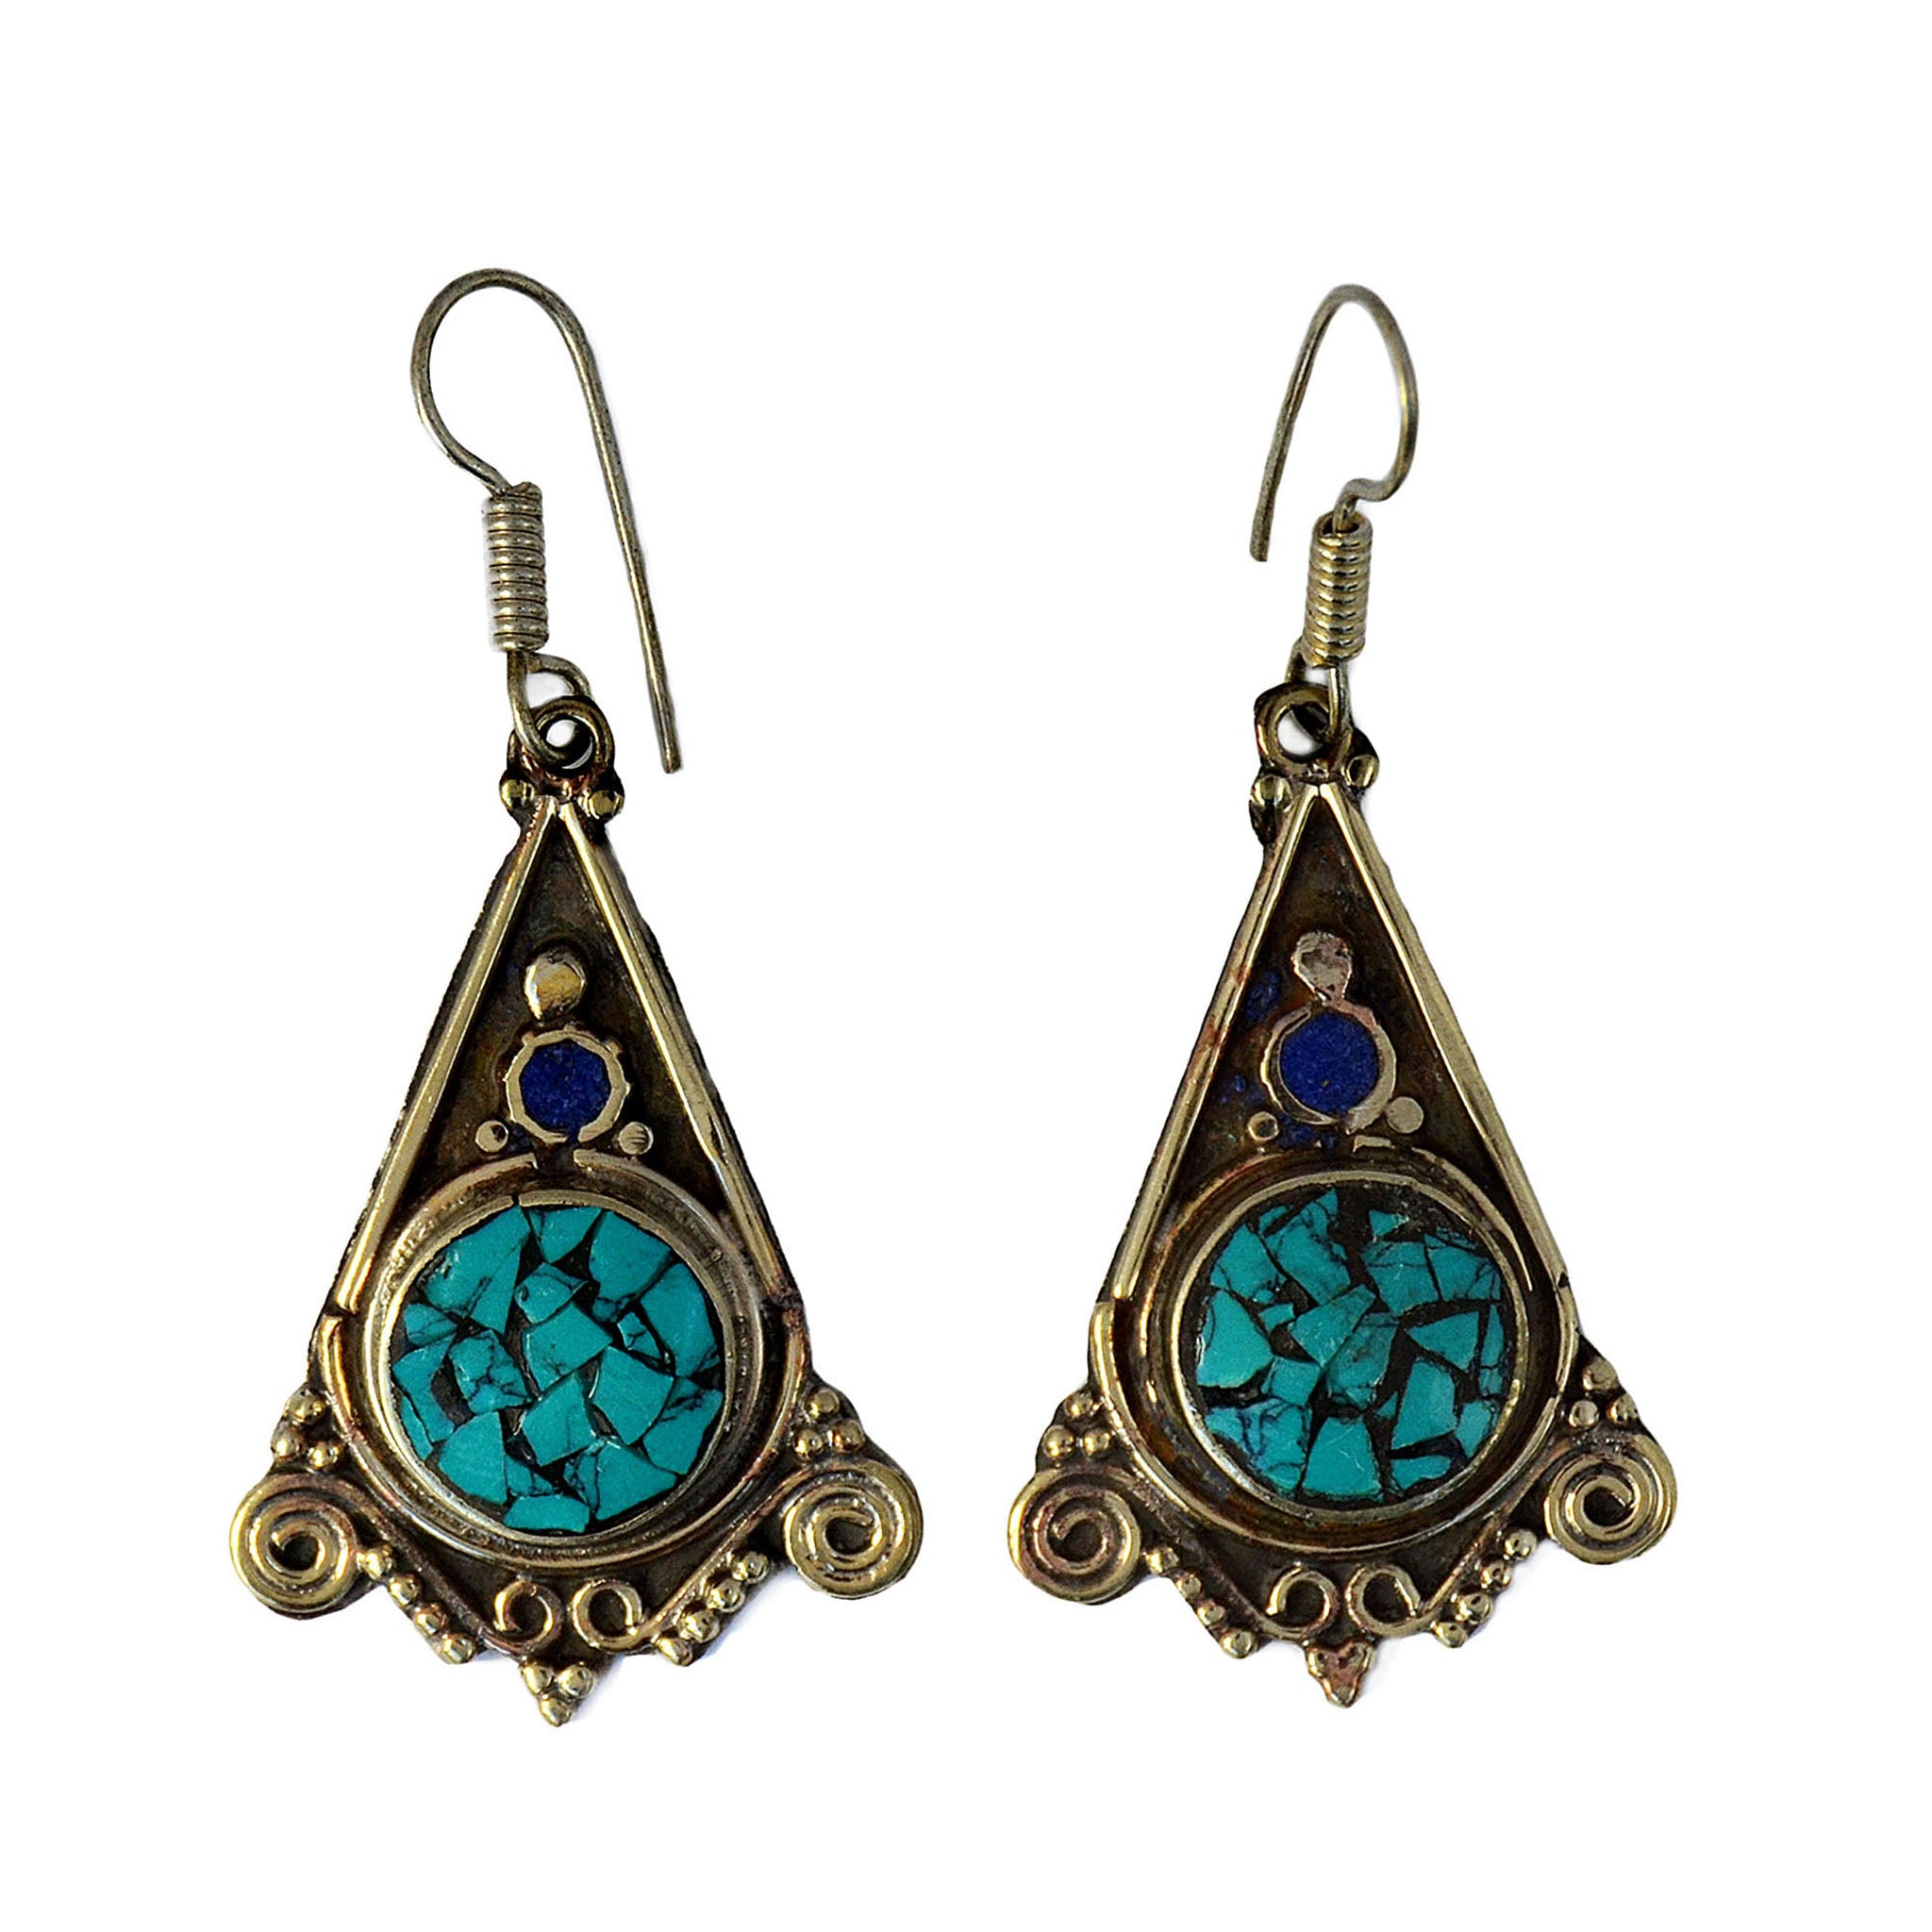 Tibetan silver dangle earrings with inlay turquoise and lapis lazuli stones